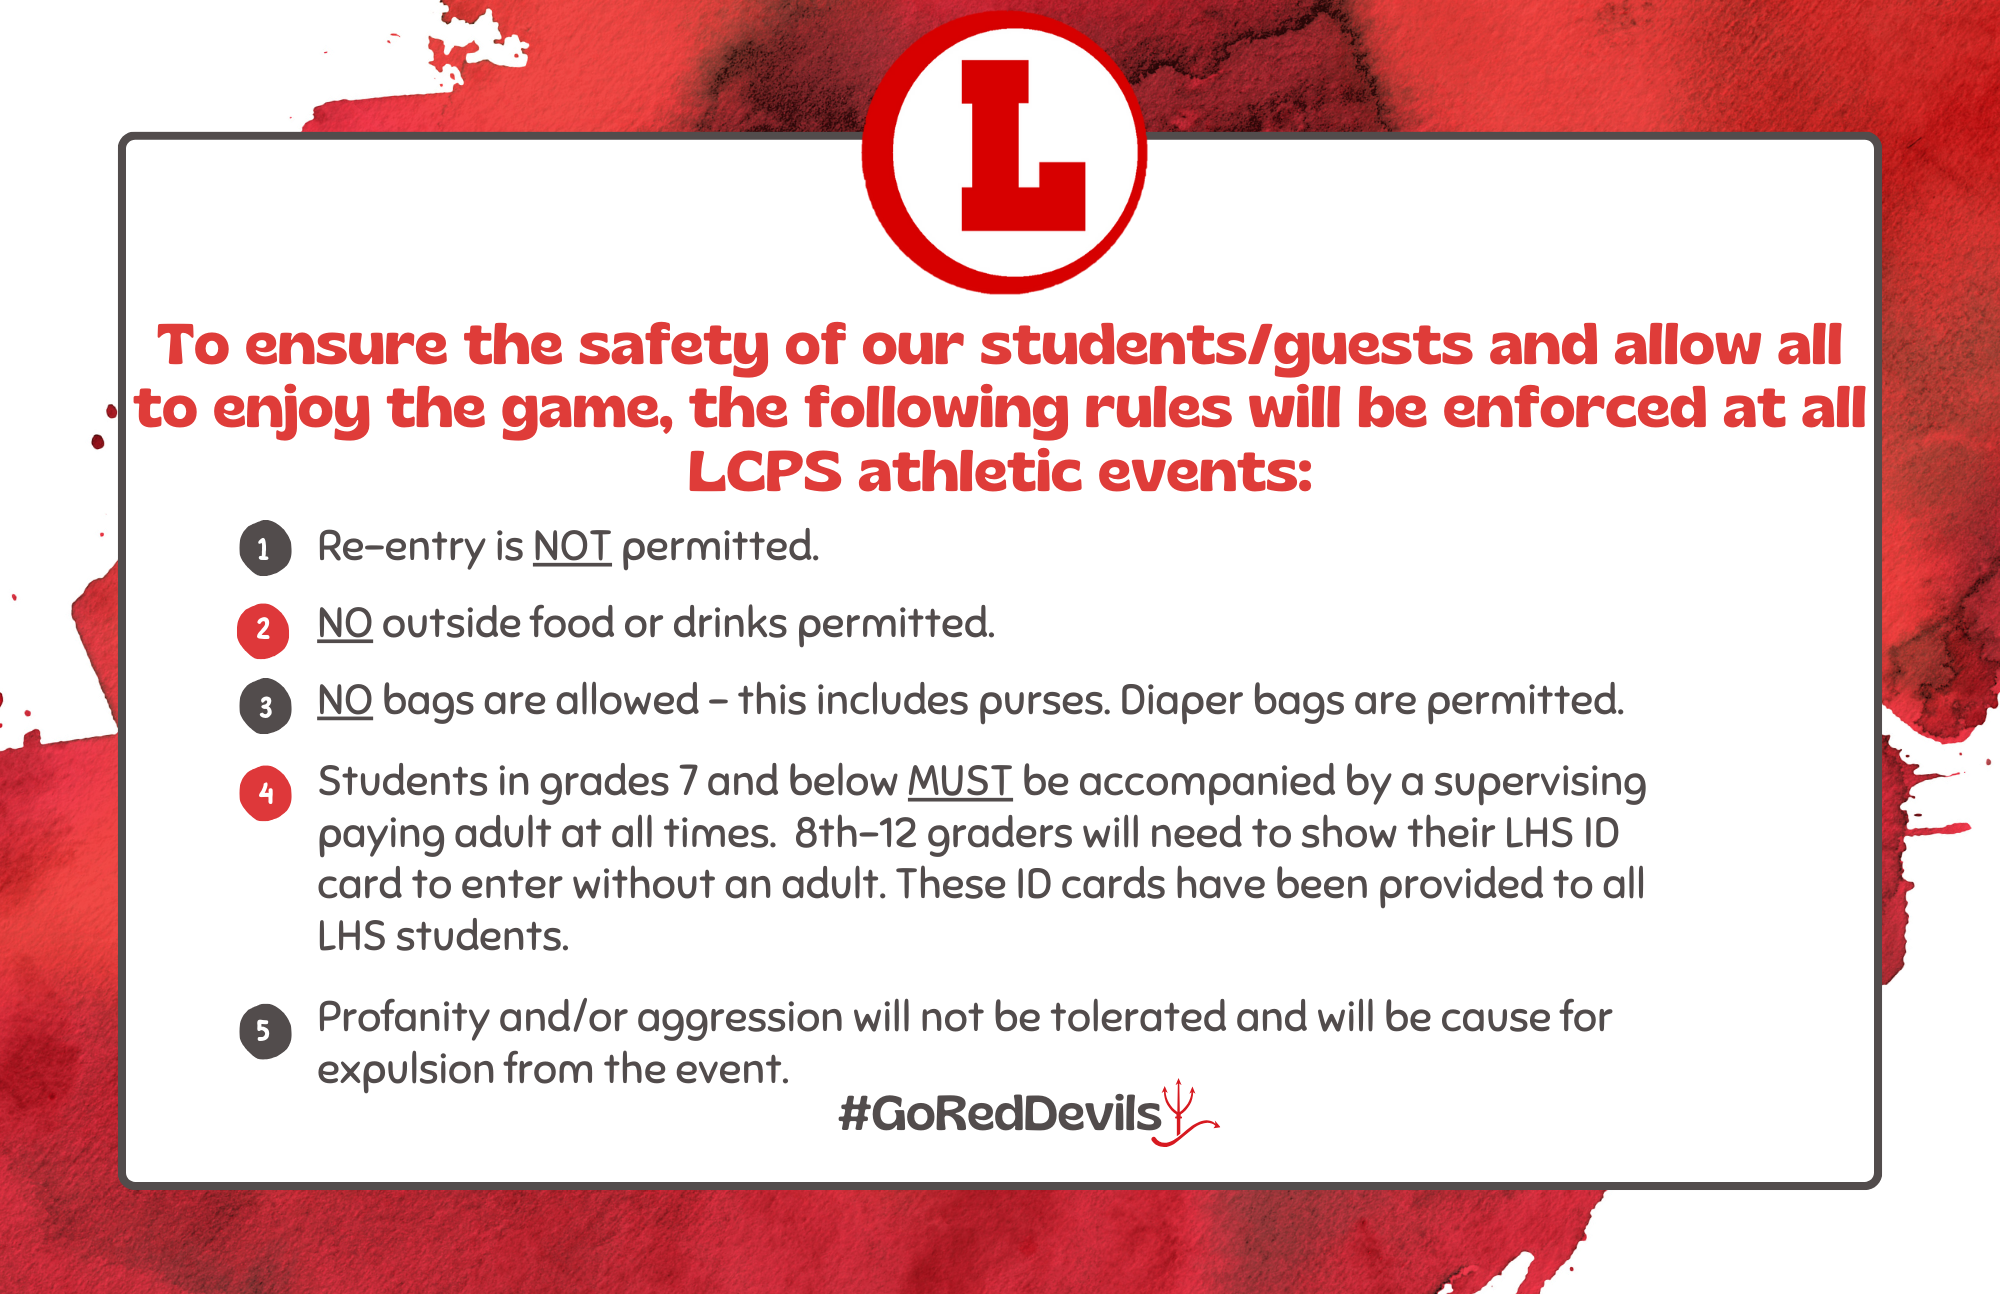 To ensure the safety of our students/guests and allow all to enjoy the game, the following rules will be enforced at all LCPS athletic events. 1) No bags are allowed - this includes purses. Diaper bags are permitted. 2) Students in grades 7 and below MUST be accompanied by a supervising paying adult at all times. 8th-12 graders will need to show their LHS ID card to enter without an adult. These ID cards have been provided to all LHS students. 3) Re-entry is NOT permitted at athletic events. 4) Profanity and/or aggression will not be tolerated and will be cause for expulsion from the event. 5) No outside food or drinks are permitted